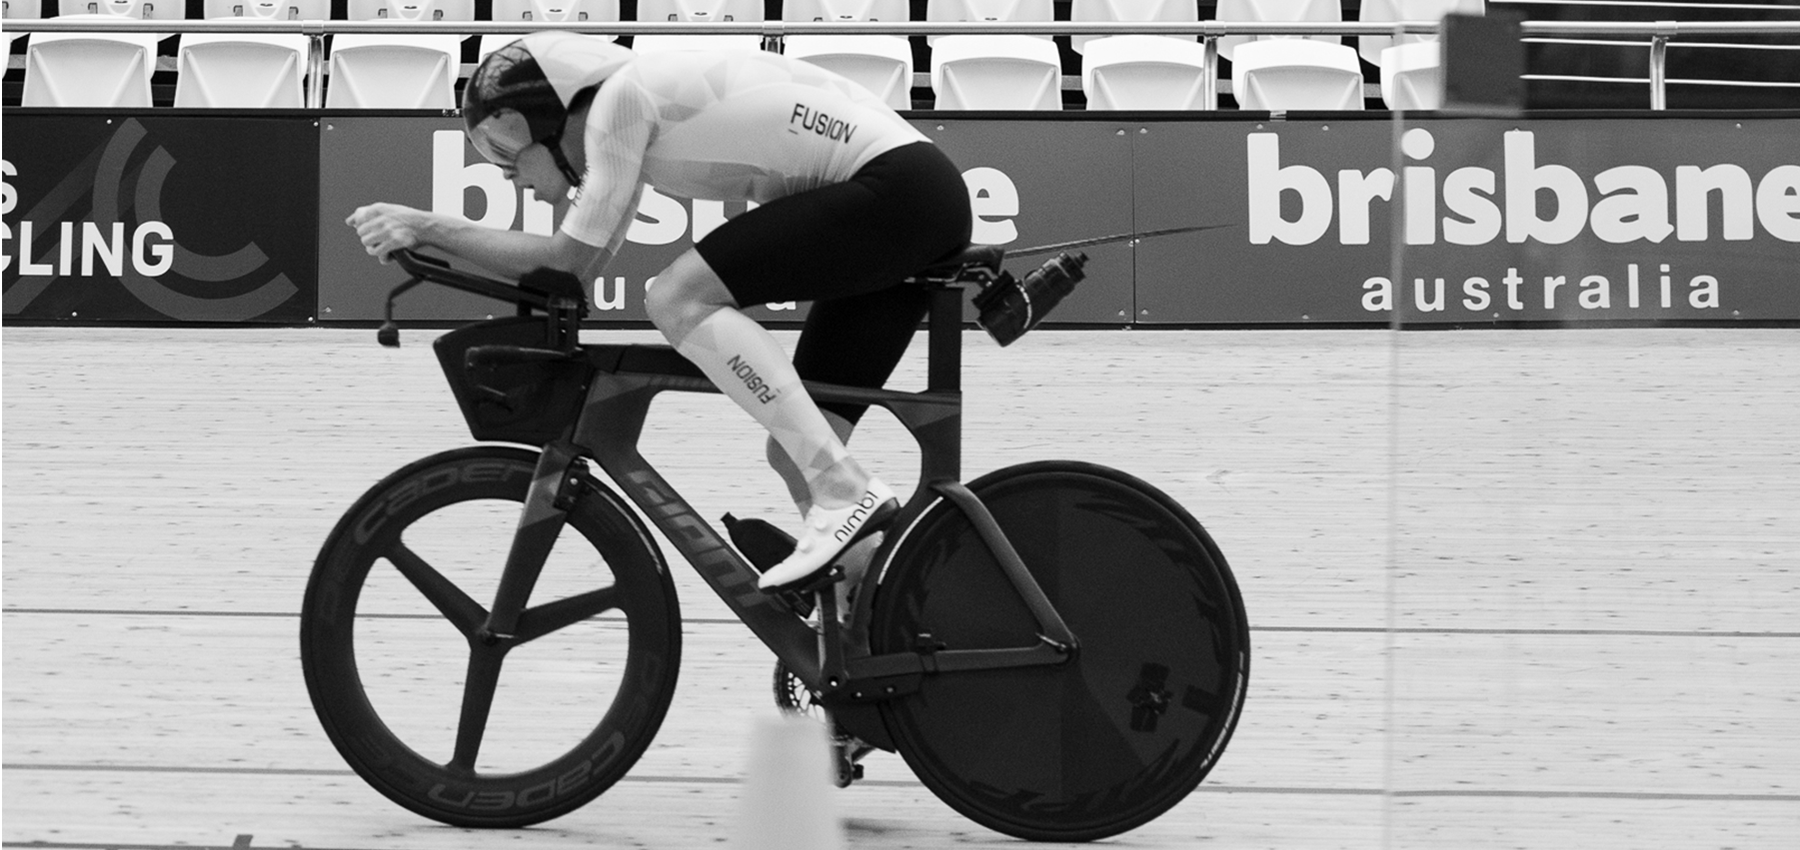 Fusion Tempo Tri Suit in action on the track